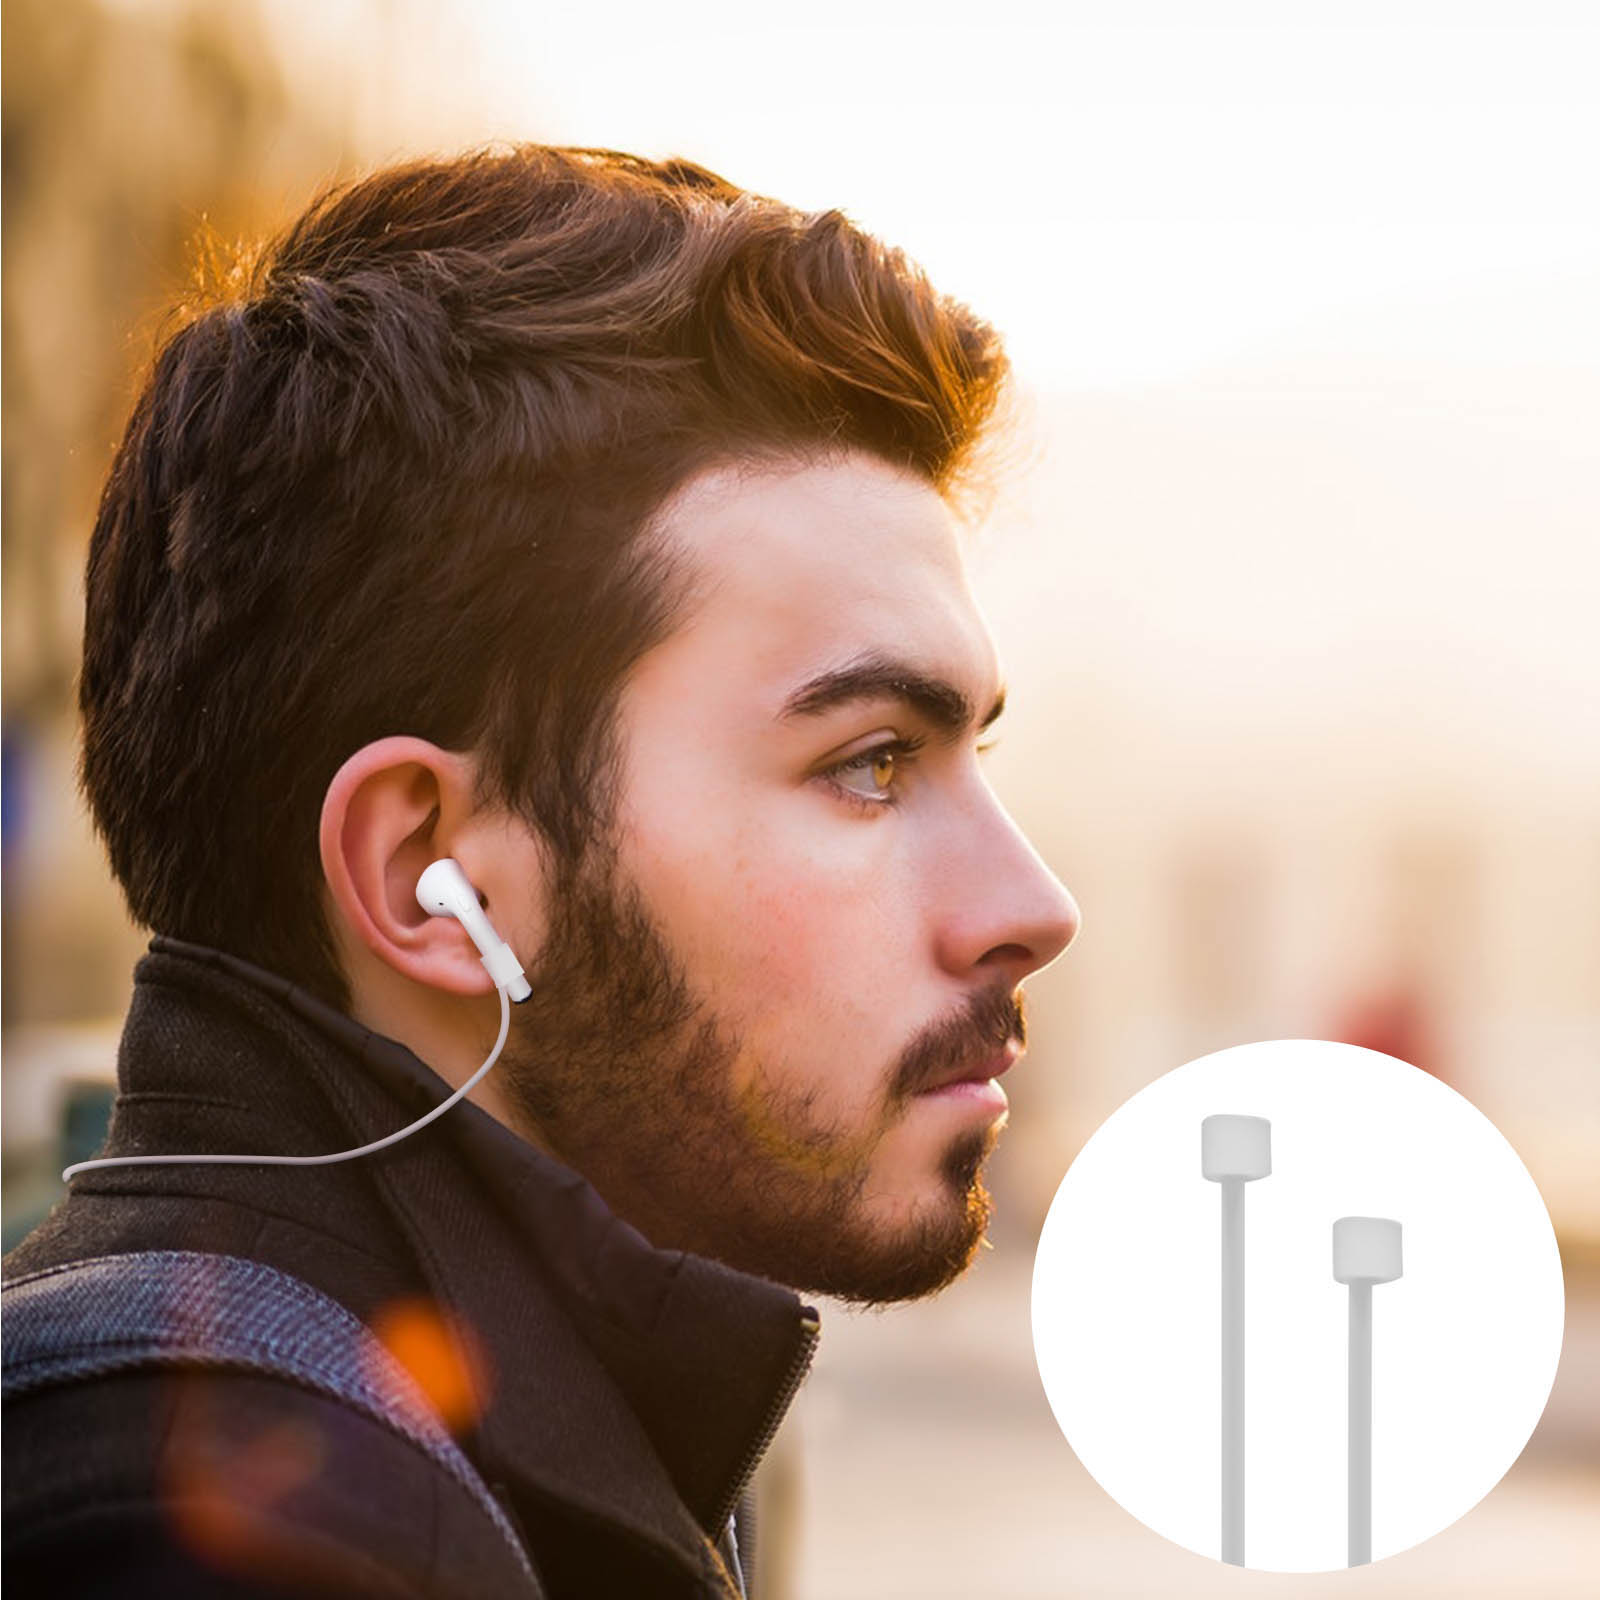 AVIZAR AirPods Weiß AirPods, Full Apple, Tasche, Cover, Schlaufe, Apple Hülle, 5-in-1 Set